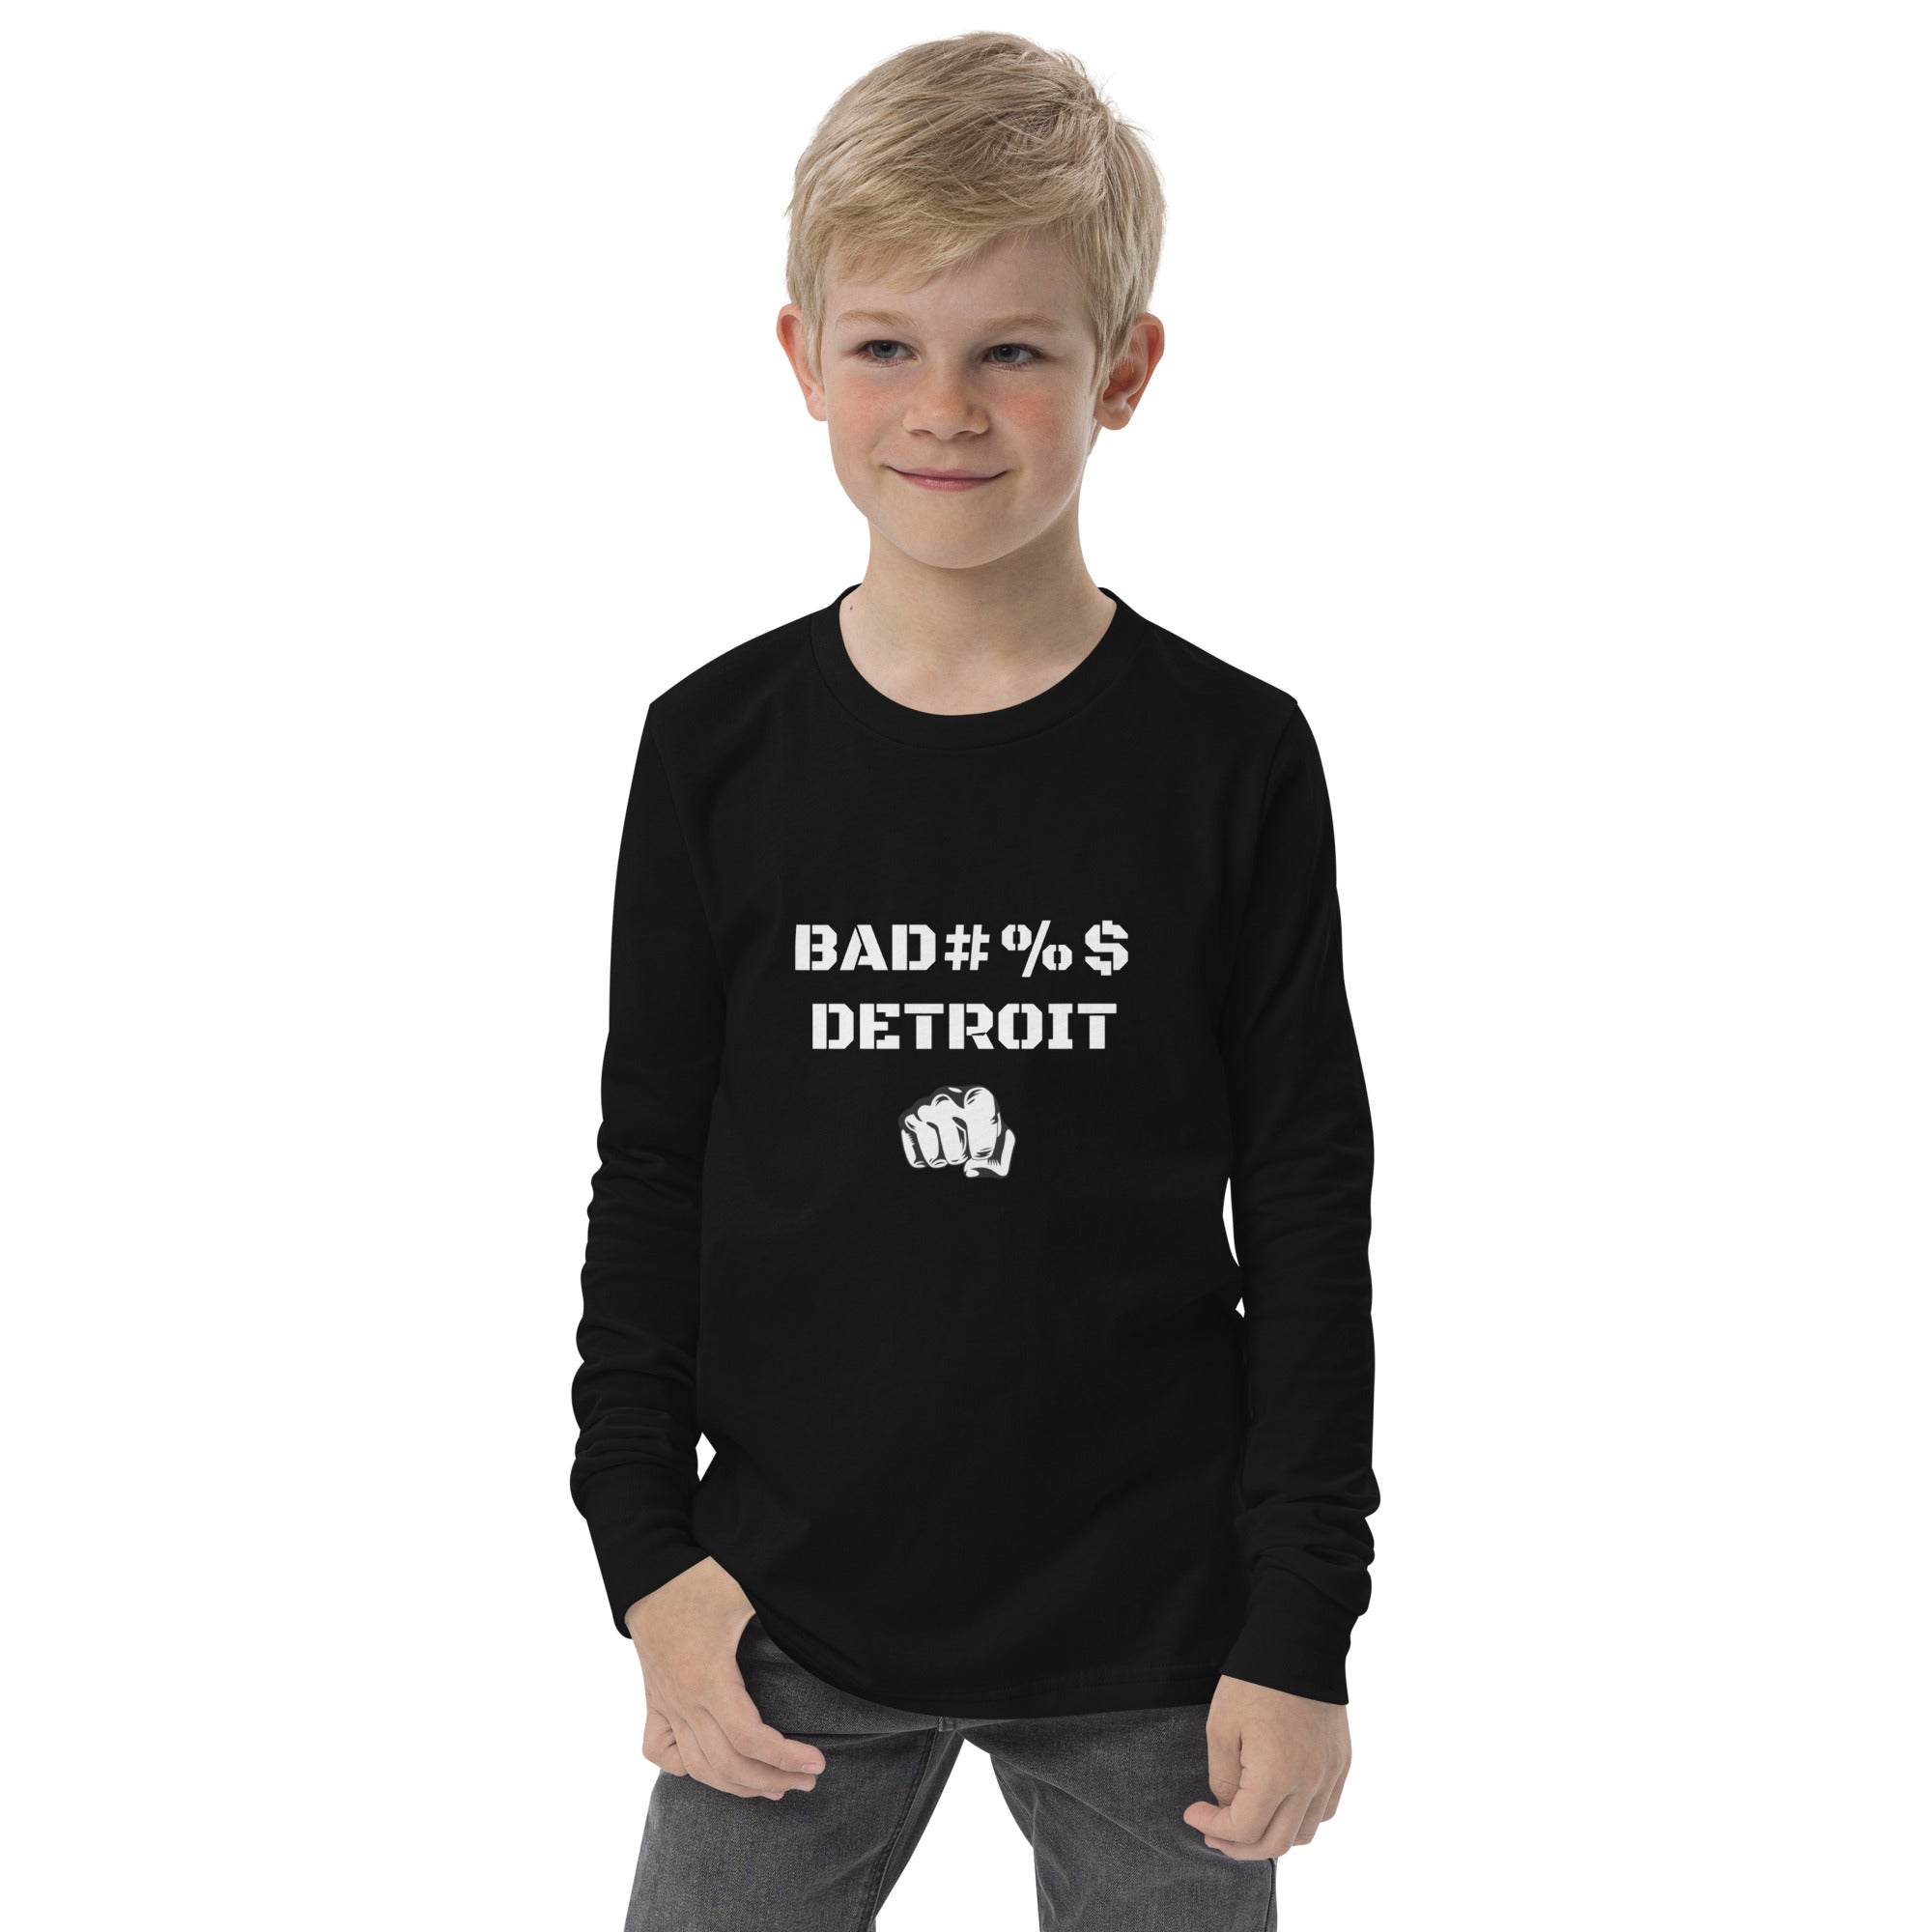 Youth BAD#%$ Long Sleeve Tee-White Accent-Clean Version - BADASS DETROIT